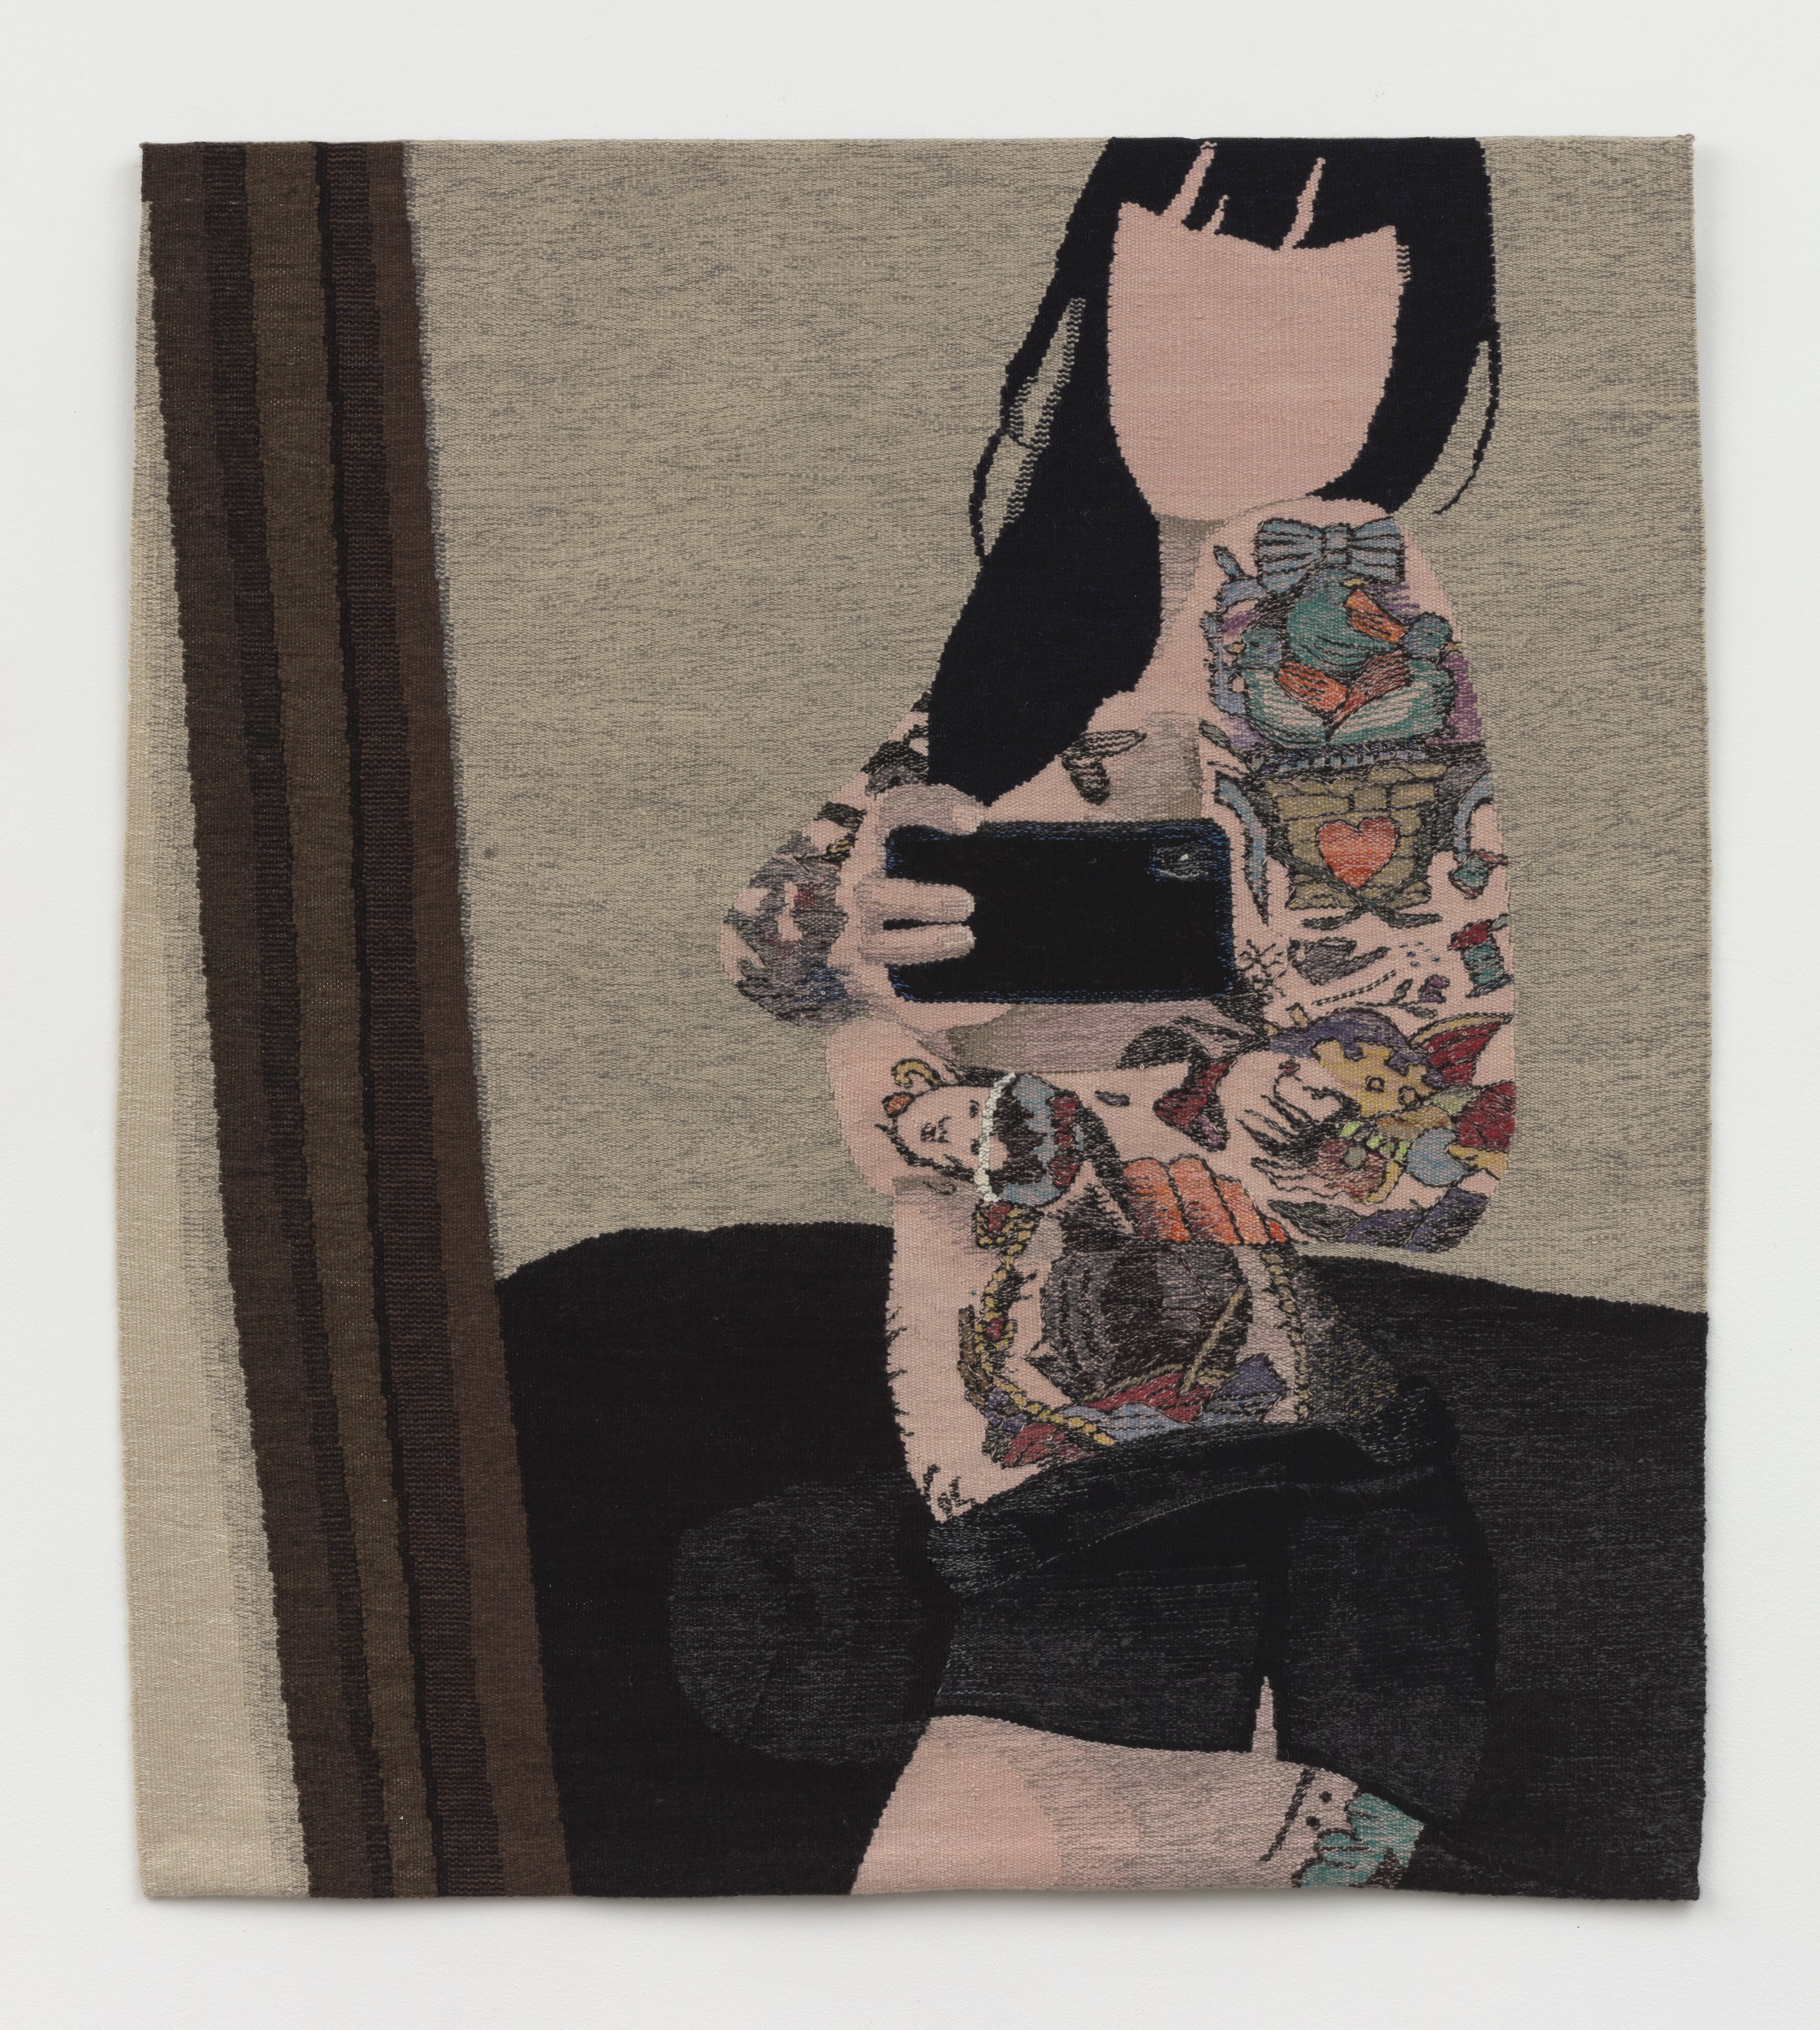 Woven tapestry showing a dark-haired woman with tattoos up and down her arms taking a picture of herself with a cell phone